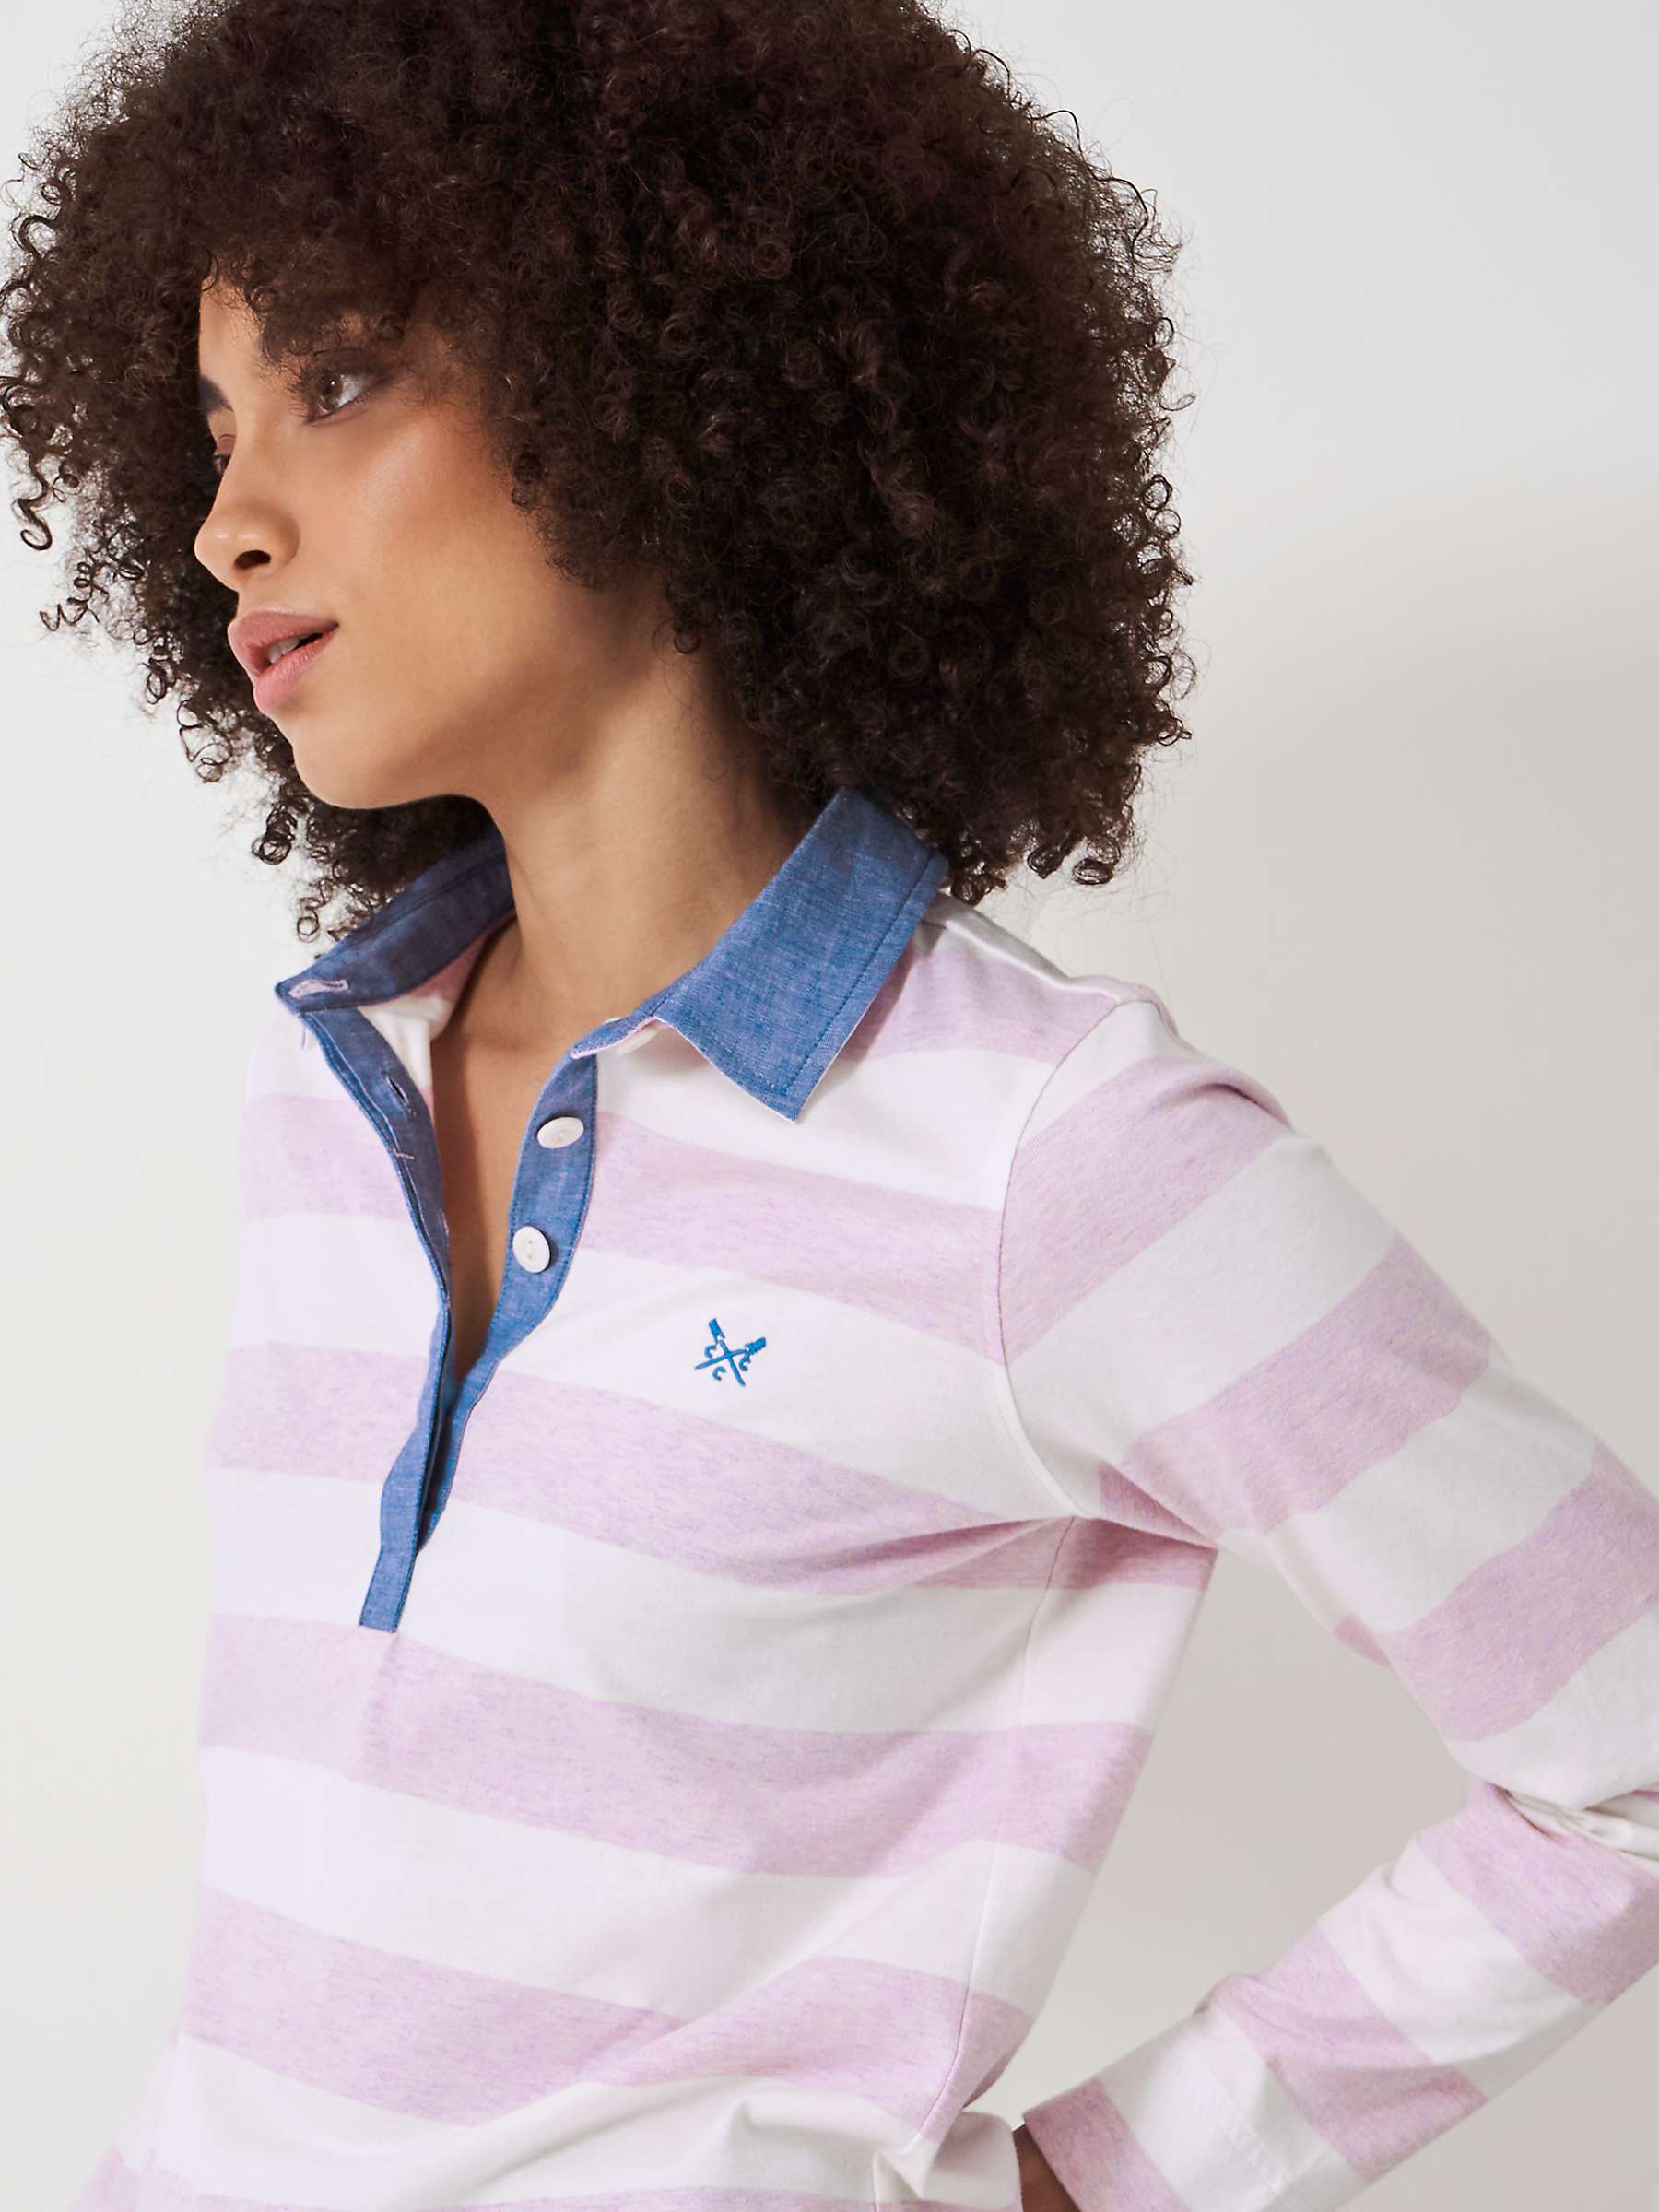 Buy Crew Clothing Striped Cotton Rugby Top Online at johnlewis.com